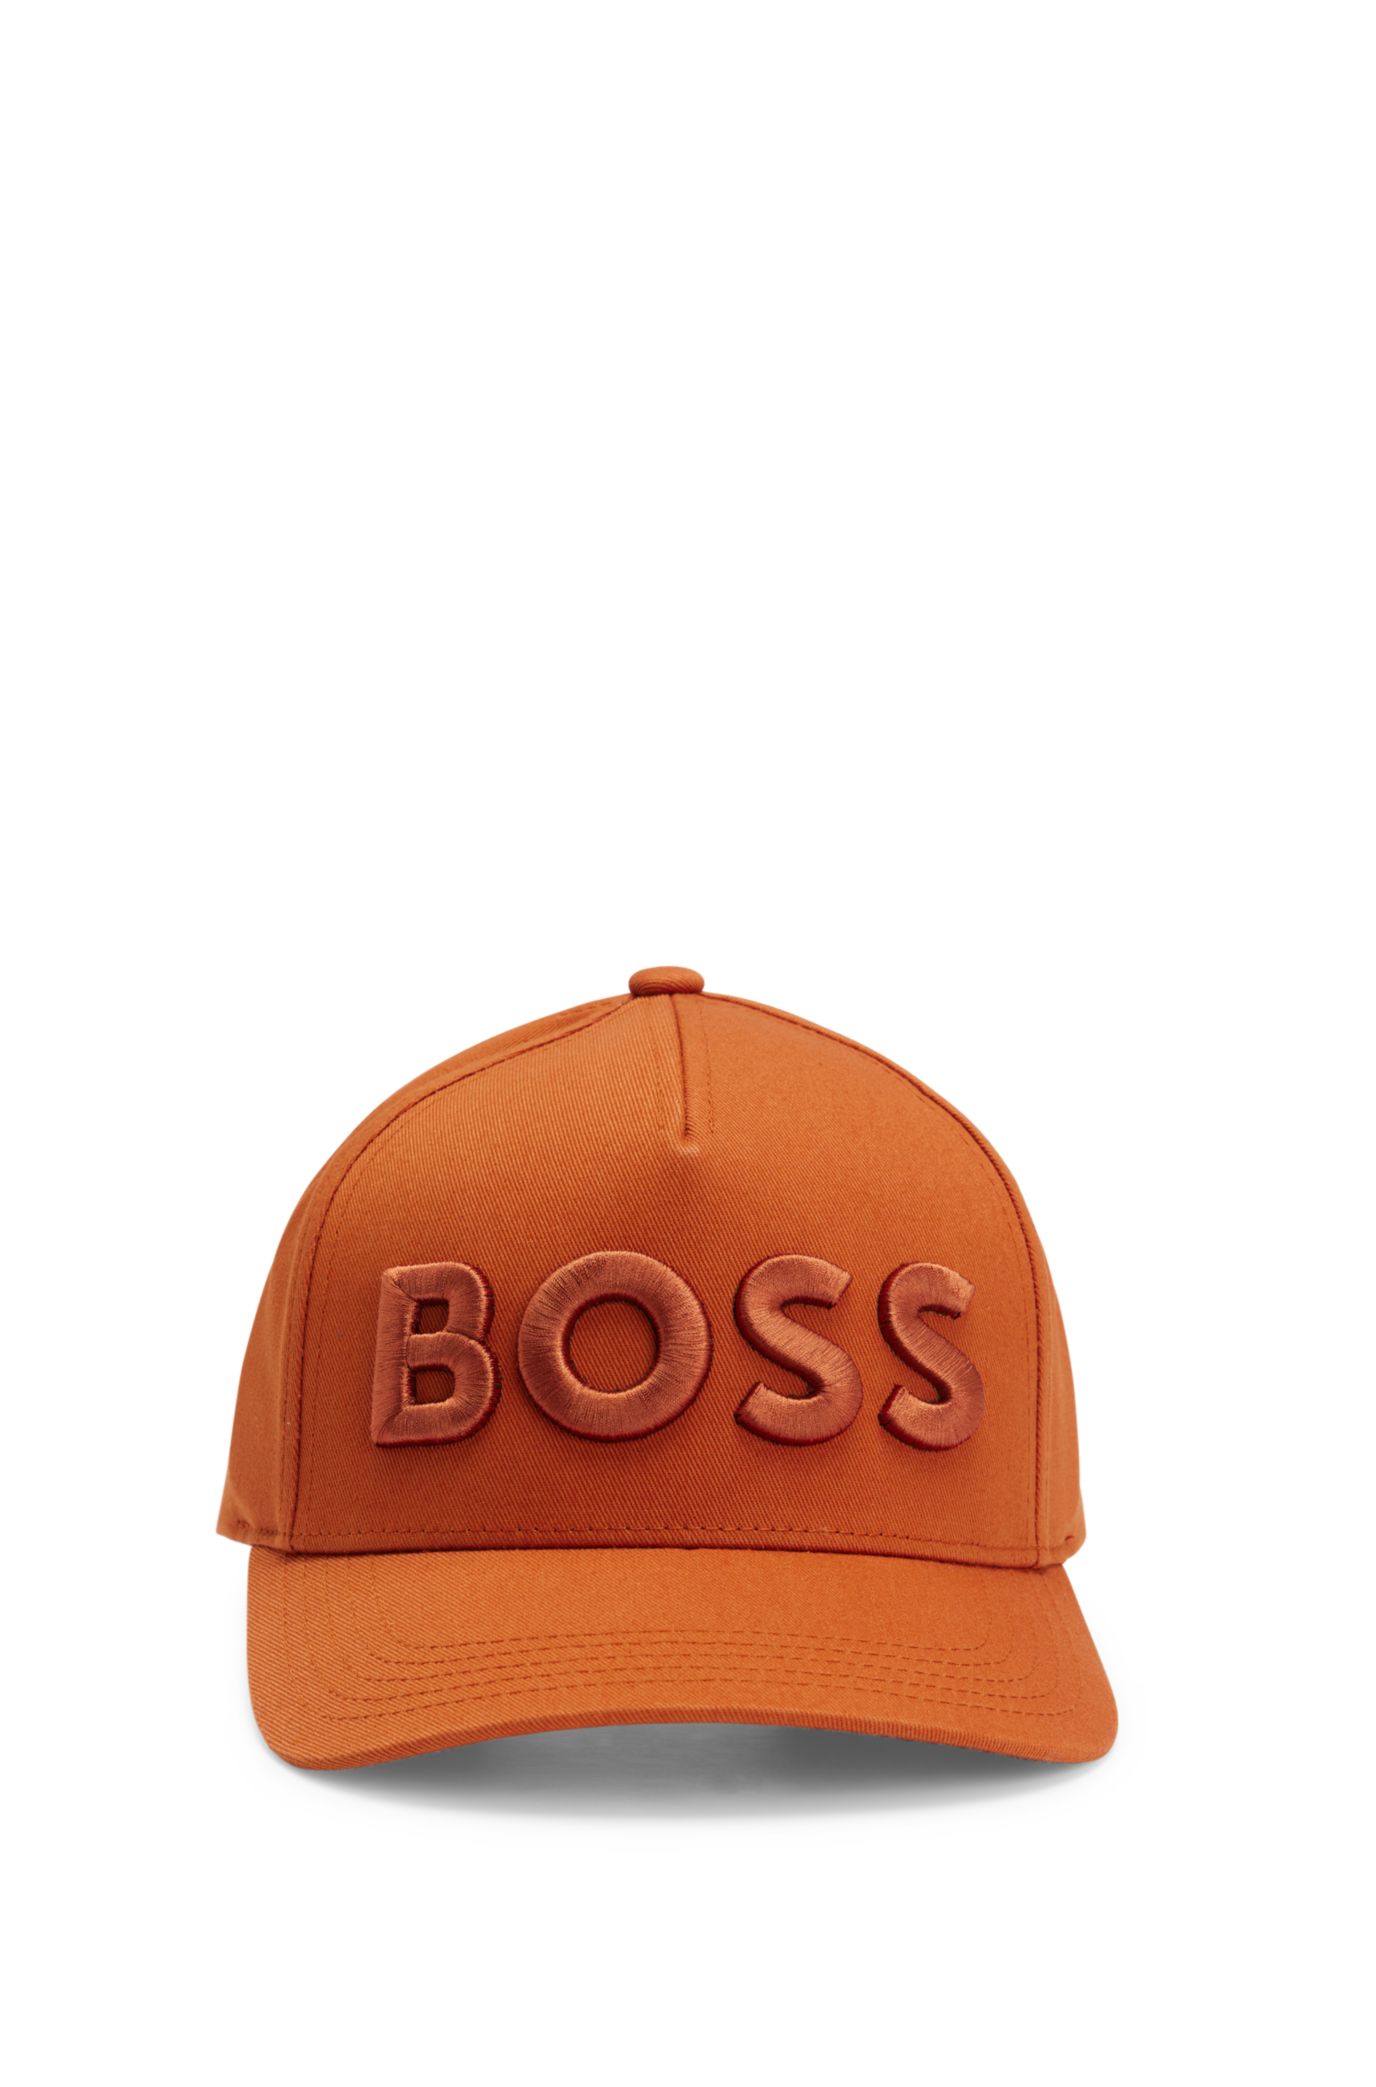 embroidered BOSS logo with Cotton-twill strap and adjustable cap -